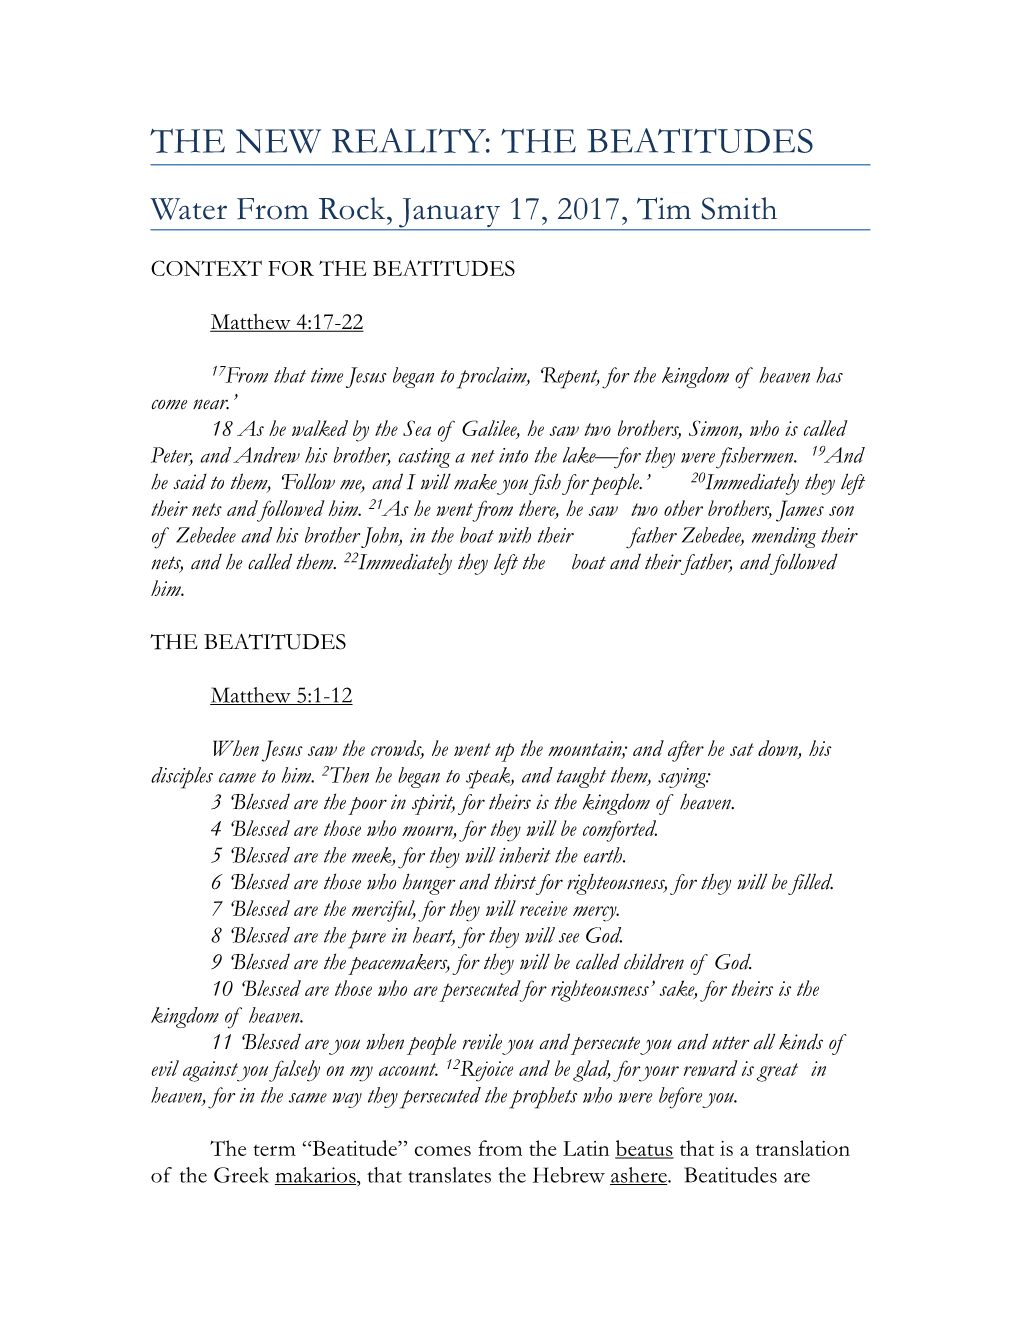 THE NEW REALITY: the BEATITUDES Water from Rock, January 17, 2017, Tim Smith